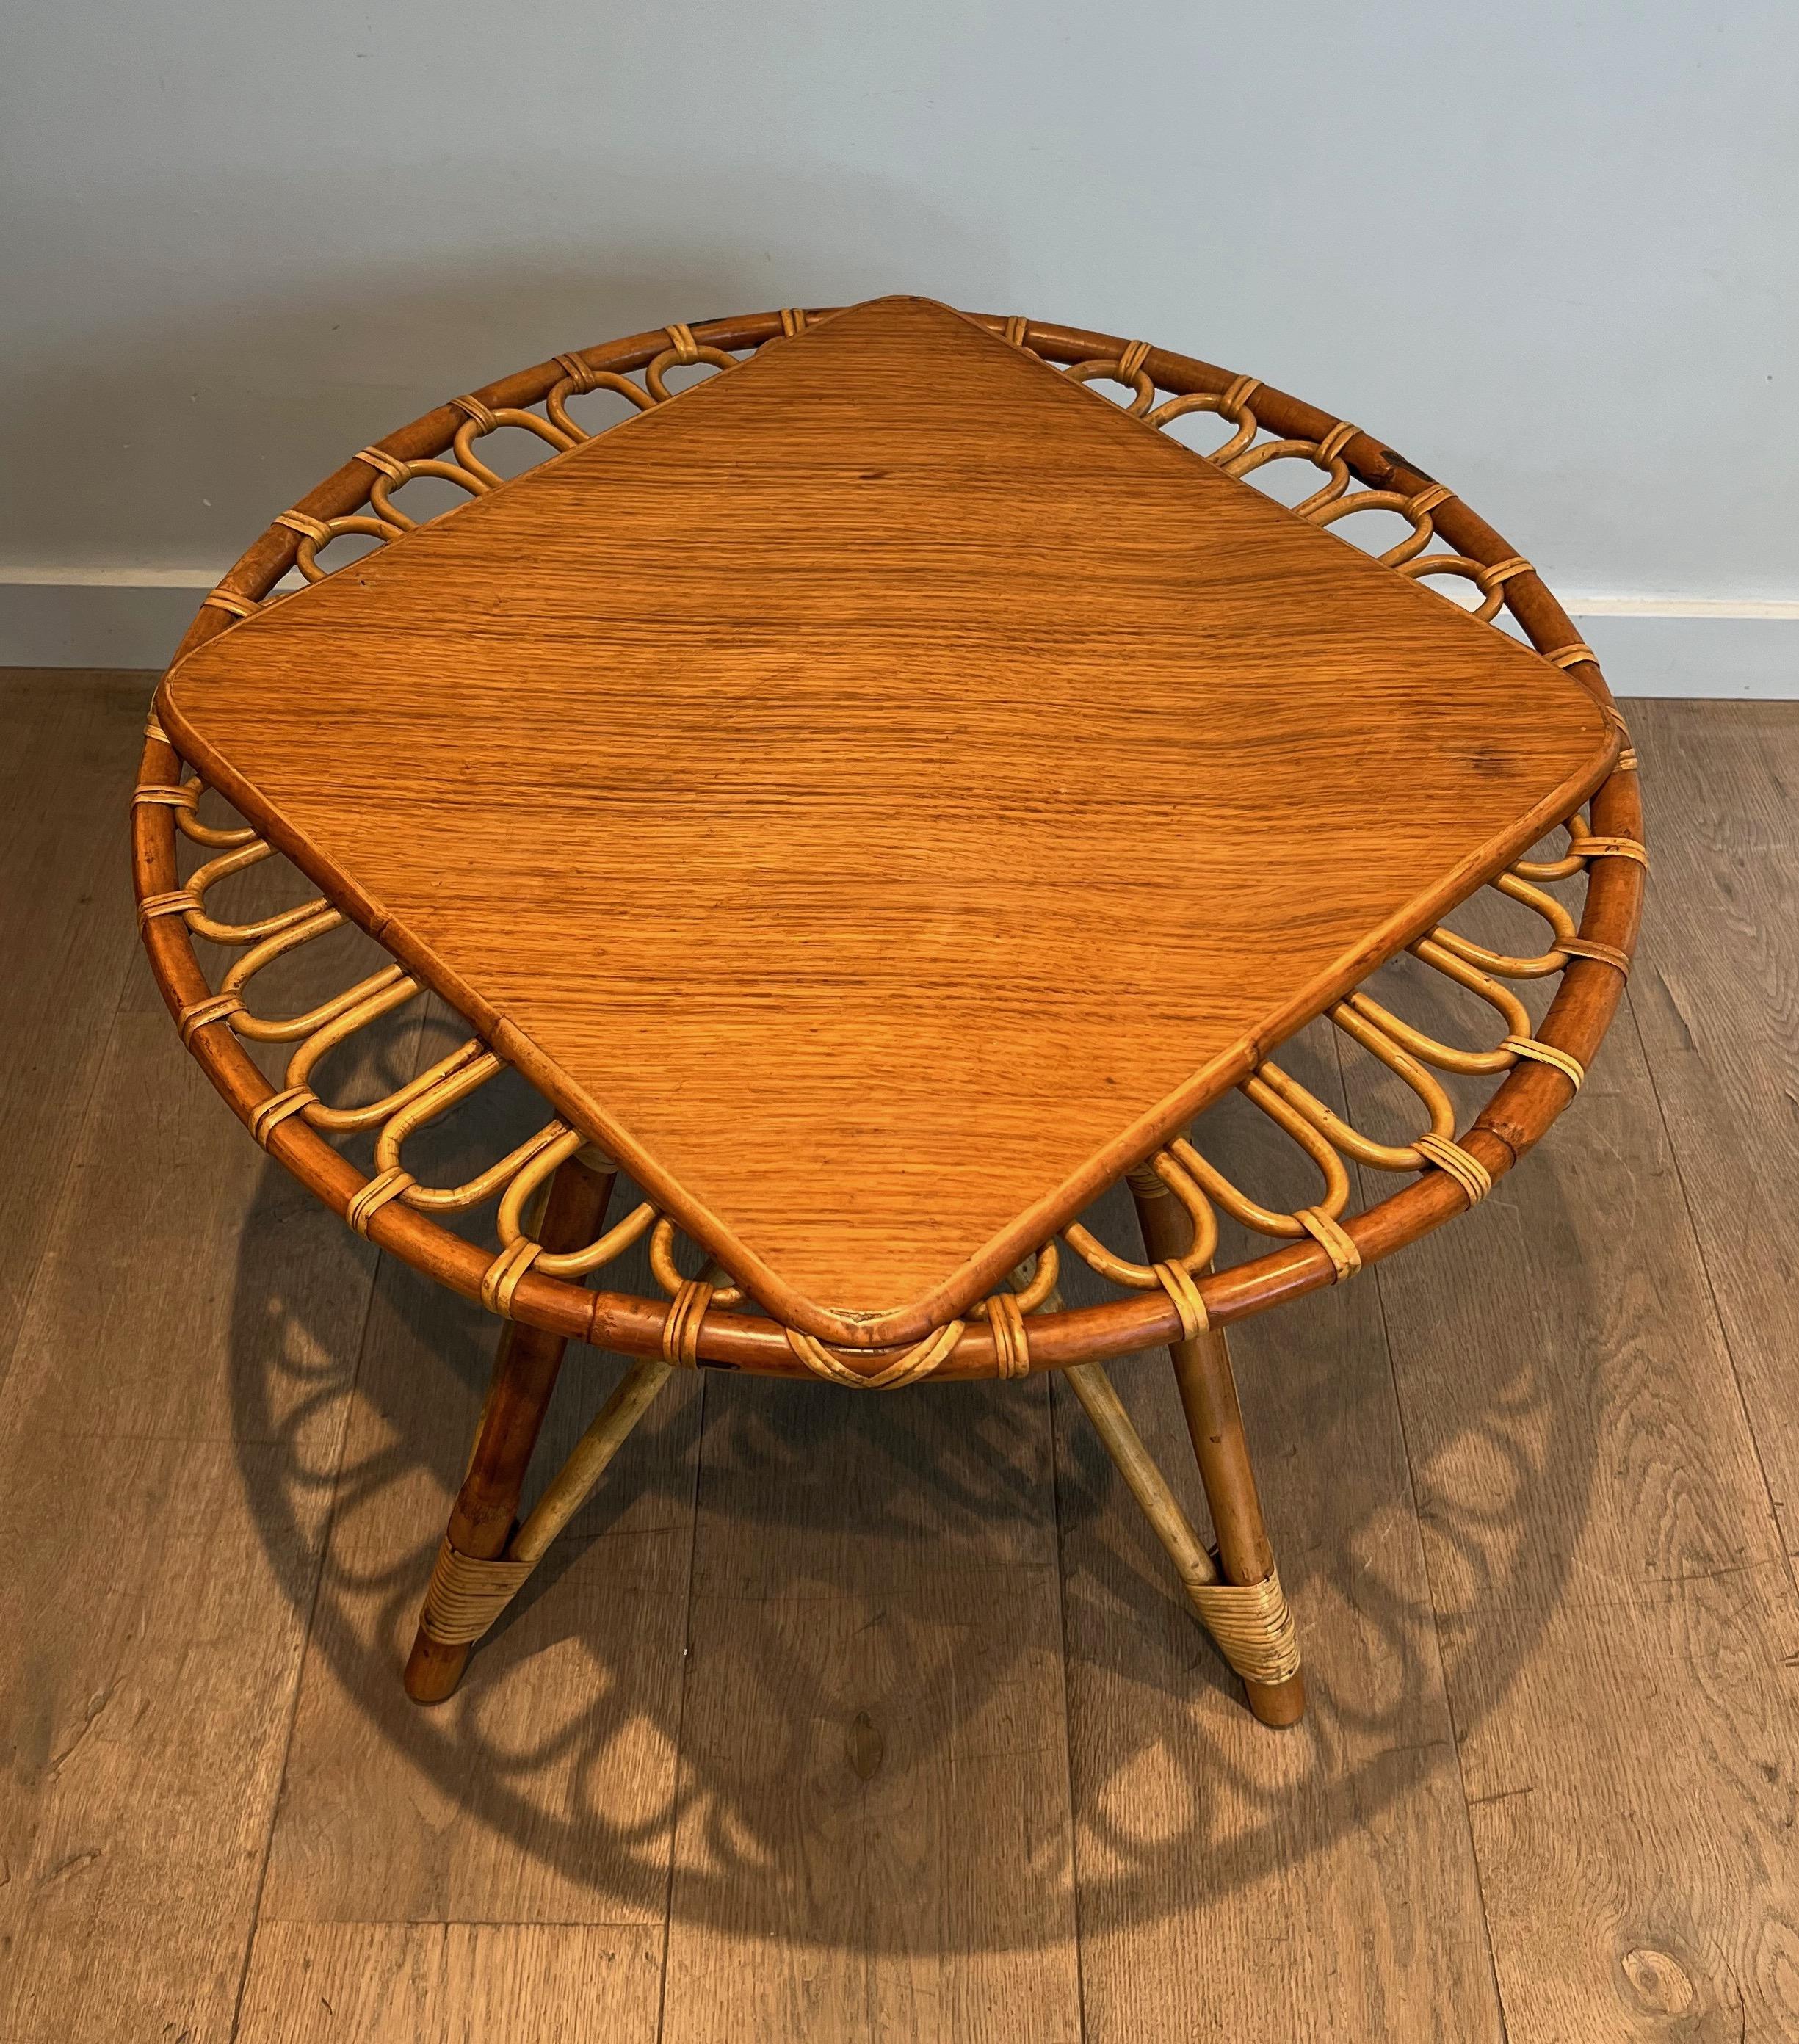 This very nice and unusual decorative round trampoline coffee table is made of rattan. This is a French work. Circa 1950